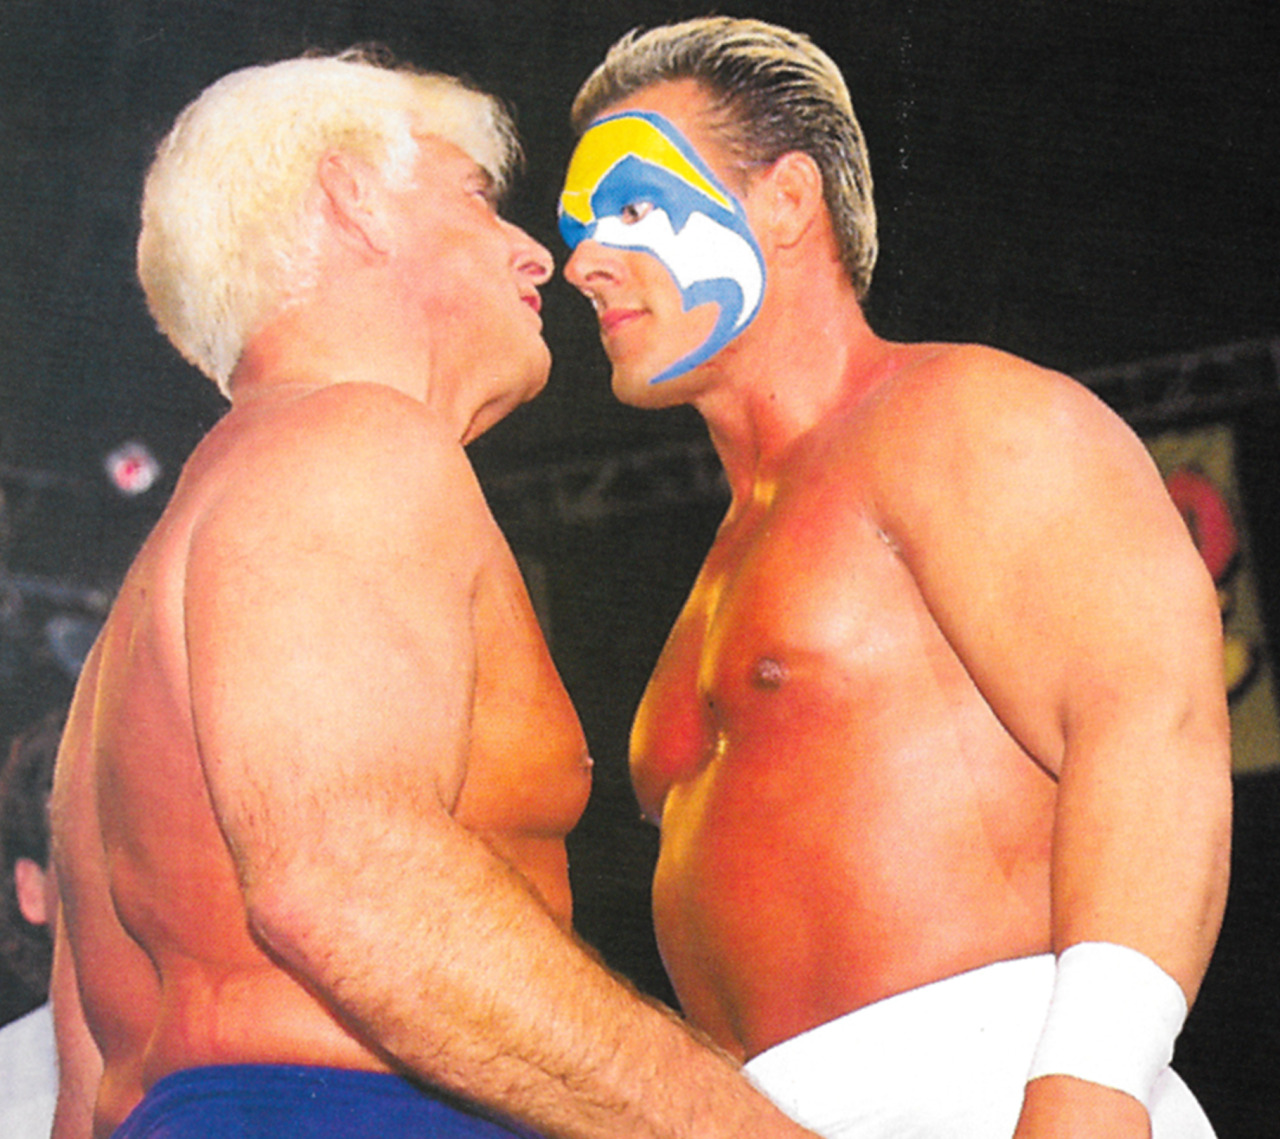 WCW WorldWide — The “Nature Boy” Ric Flair and Sting Face-to-Face...